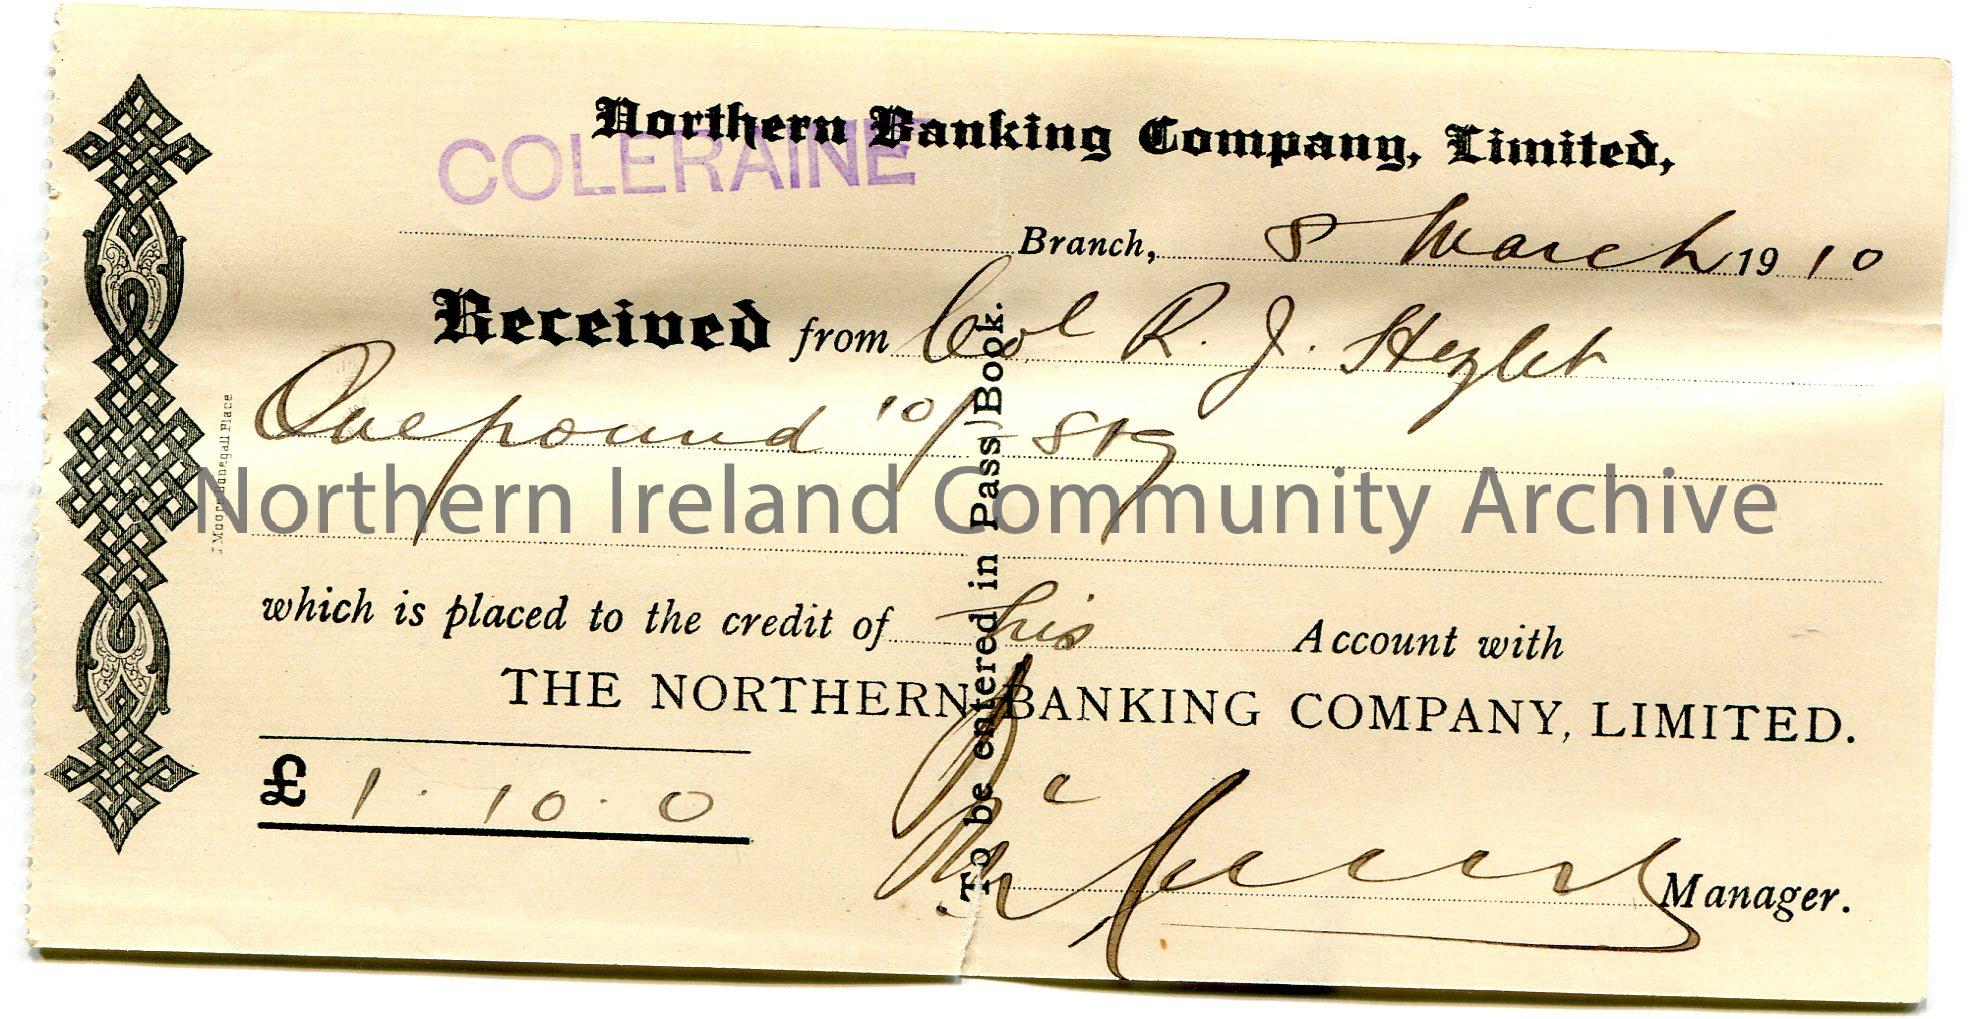 Handwritten receipt from Northern Banking Company, Limited, Coleraine branch for the credit of £1.10.0 in to the account of Col R J Hezlet. Signe…